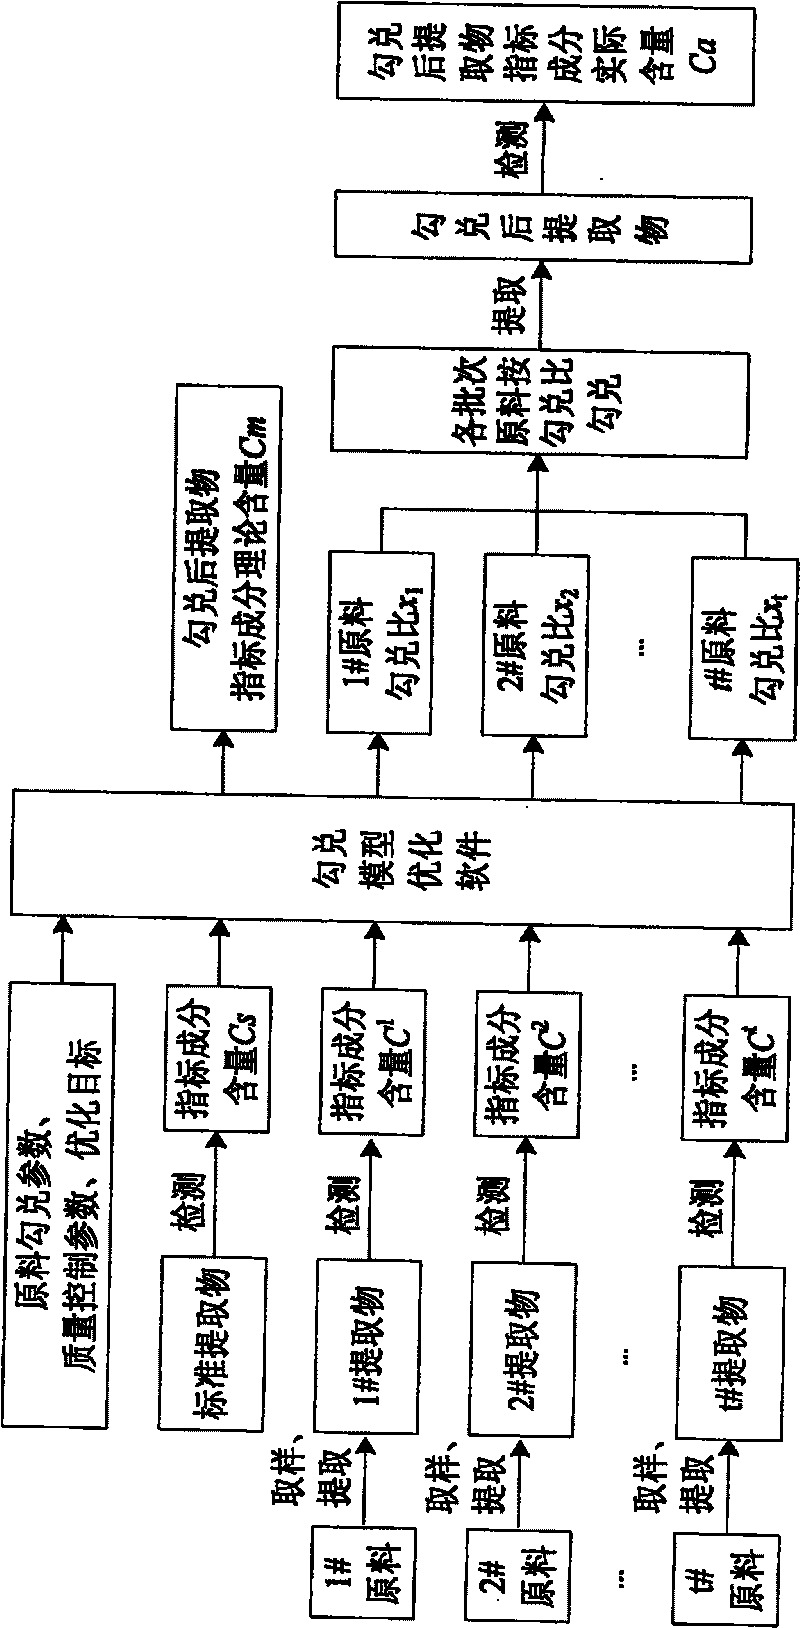 Method for preparing Chinese herbs or natural product to make extract component stable